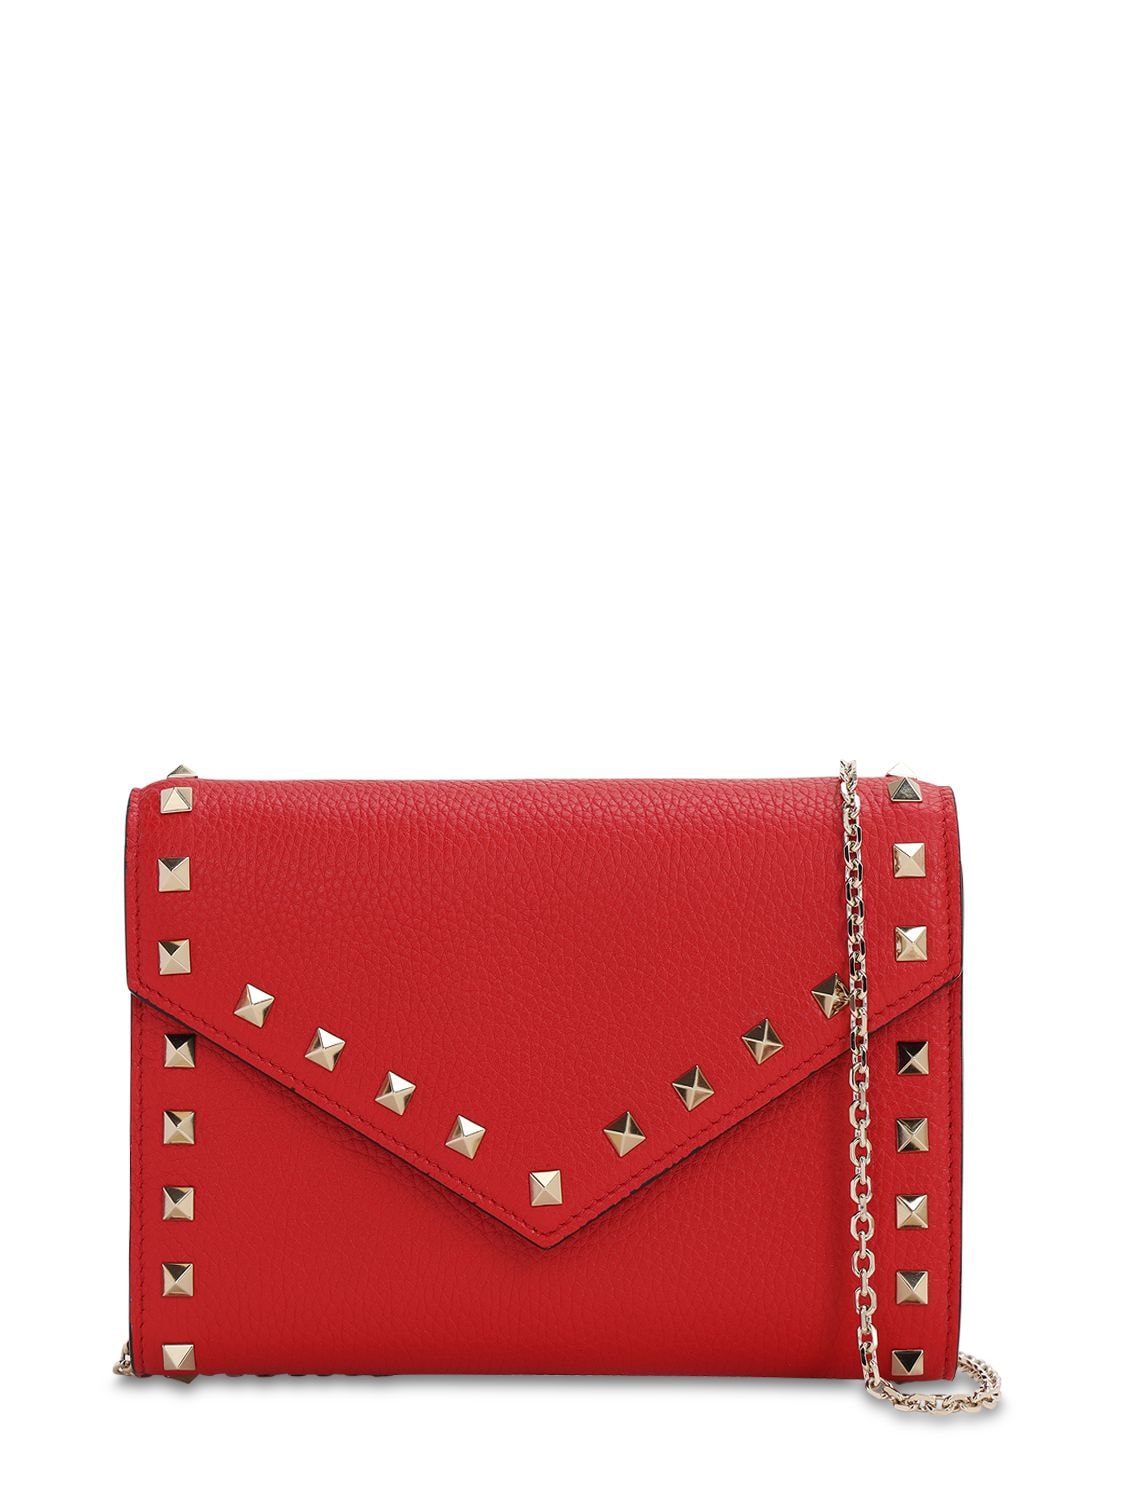 Valentino Garavani Rockstud Smooth Leather Chain Wallet In Rouge Pure